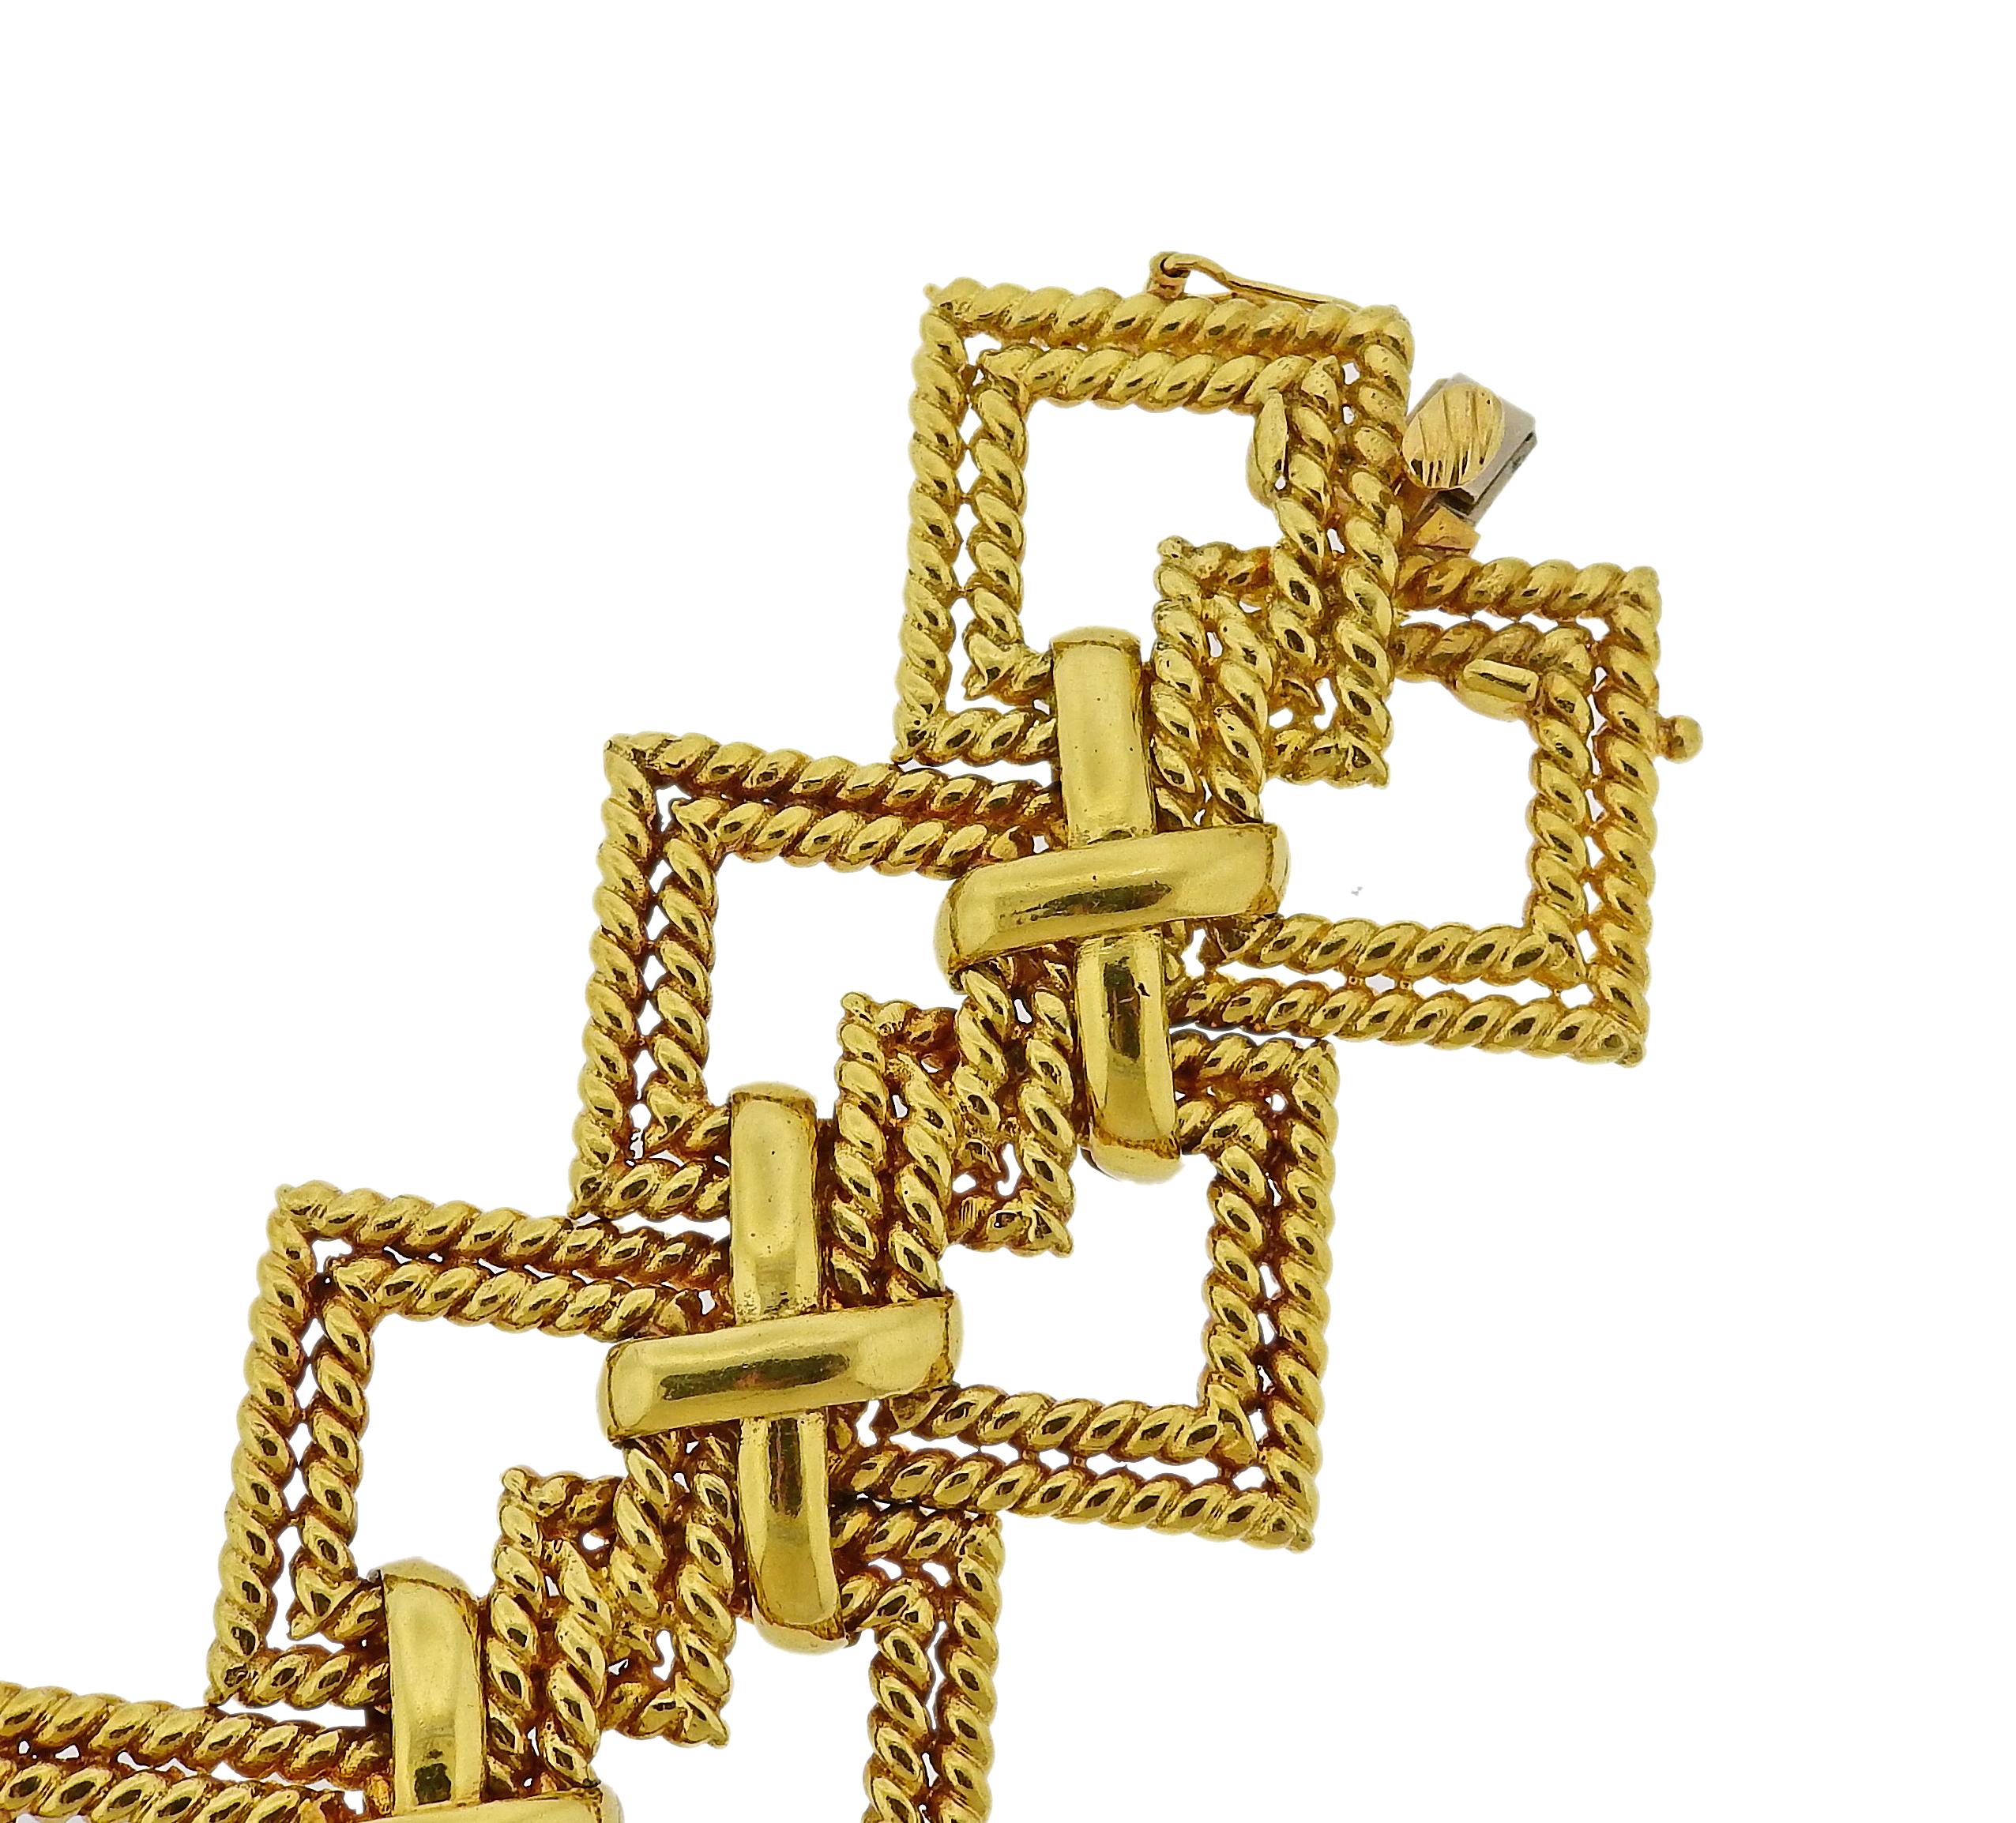 Massive 18k yellow gold wide x bracelet by Tiffany & Co, crafted in circa 1970s. Bracelet is 7.75